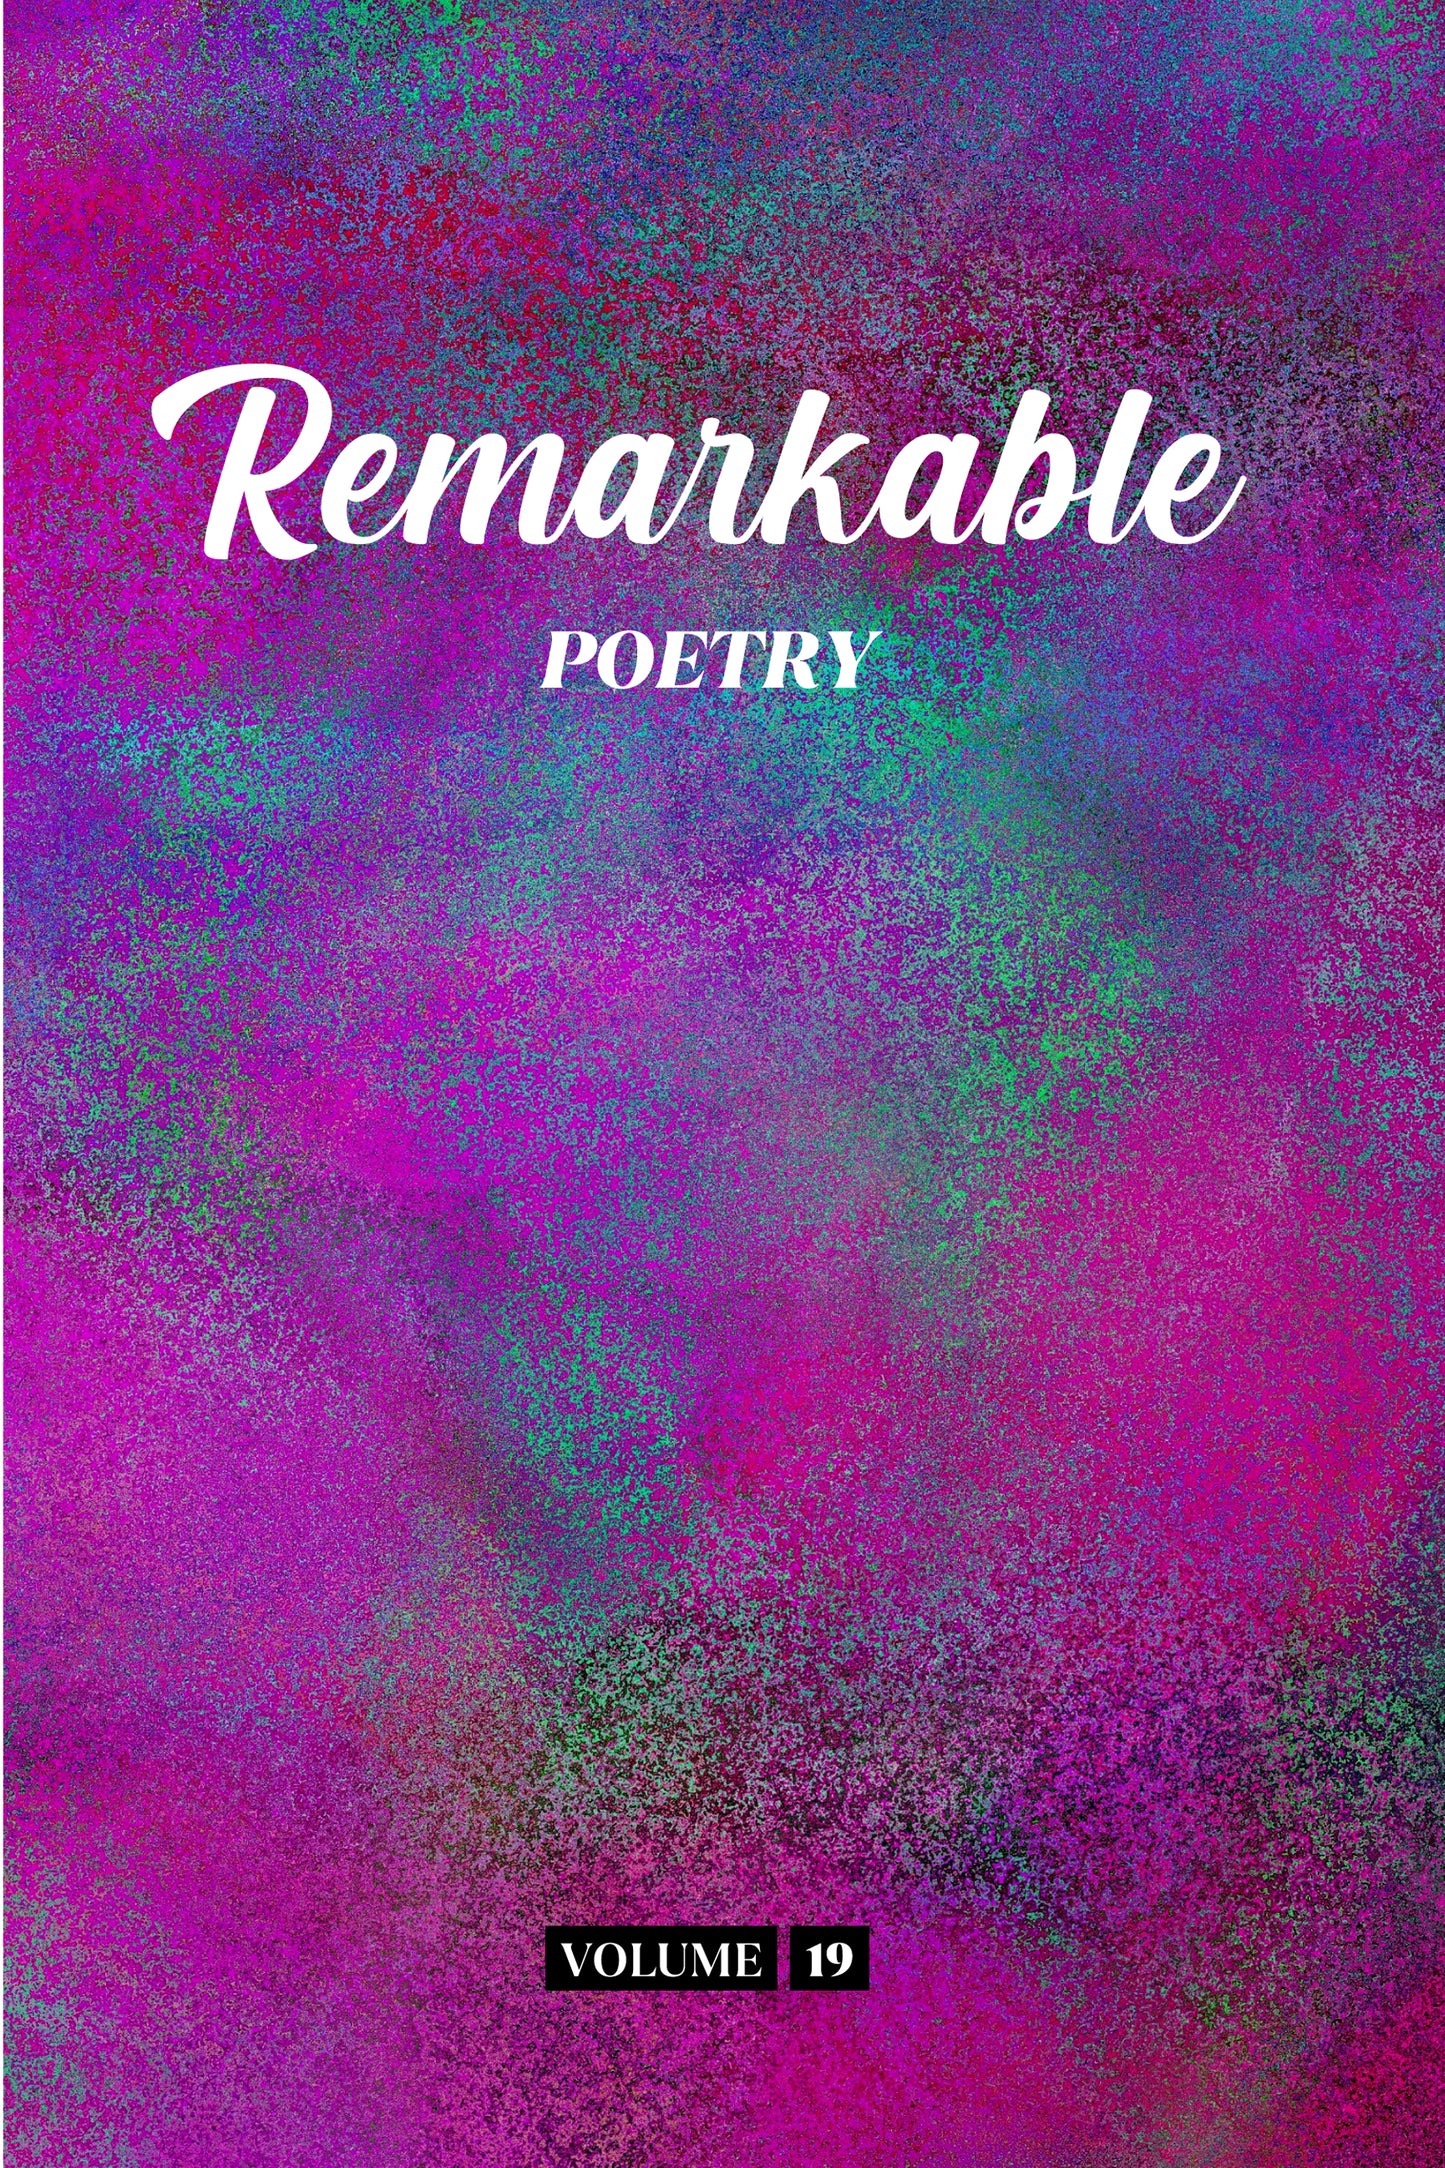 Remarkable Poetry (Volume 19) - Physical Book (Pre-Order)